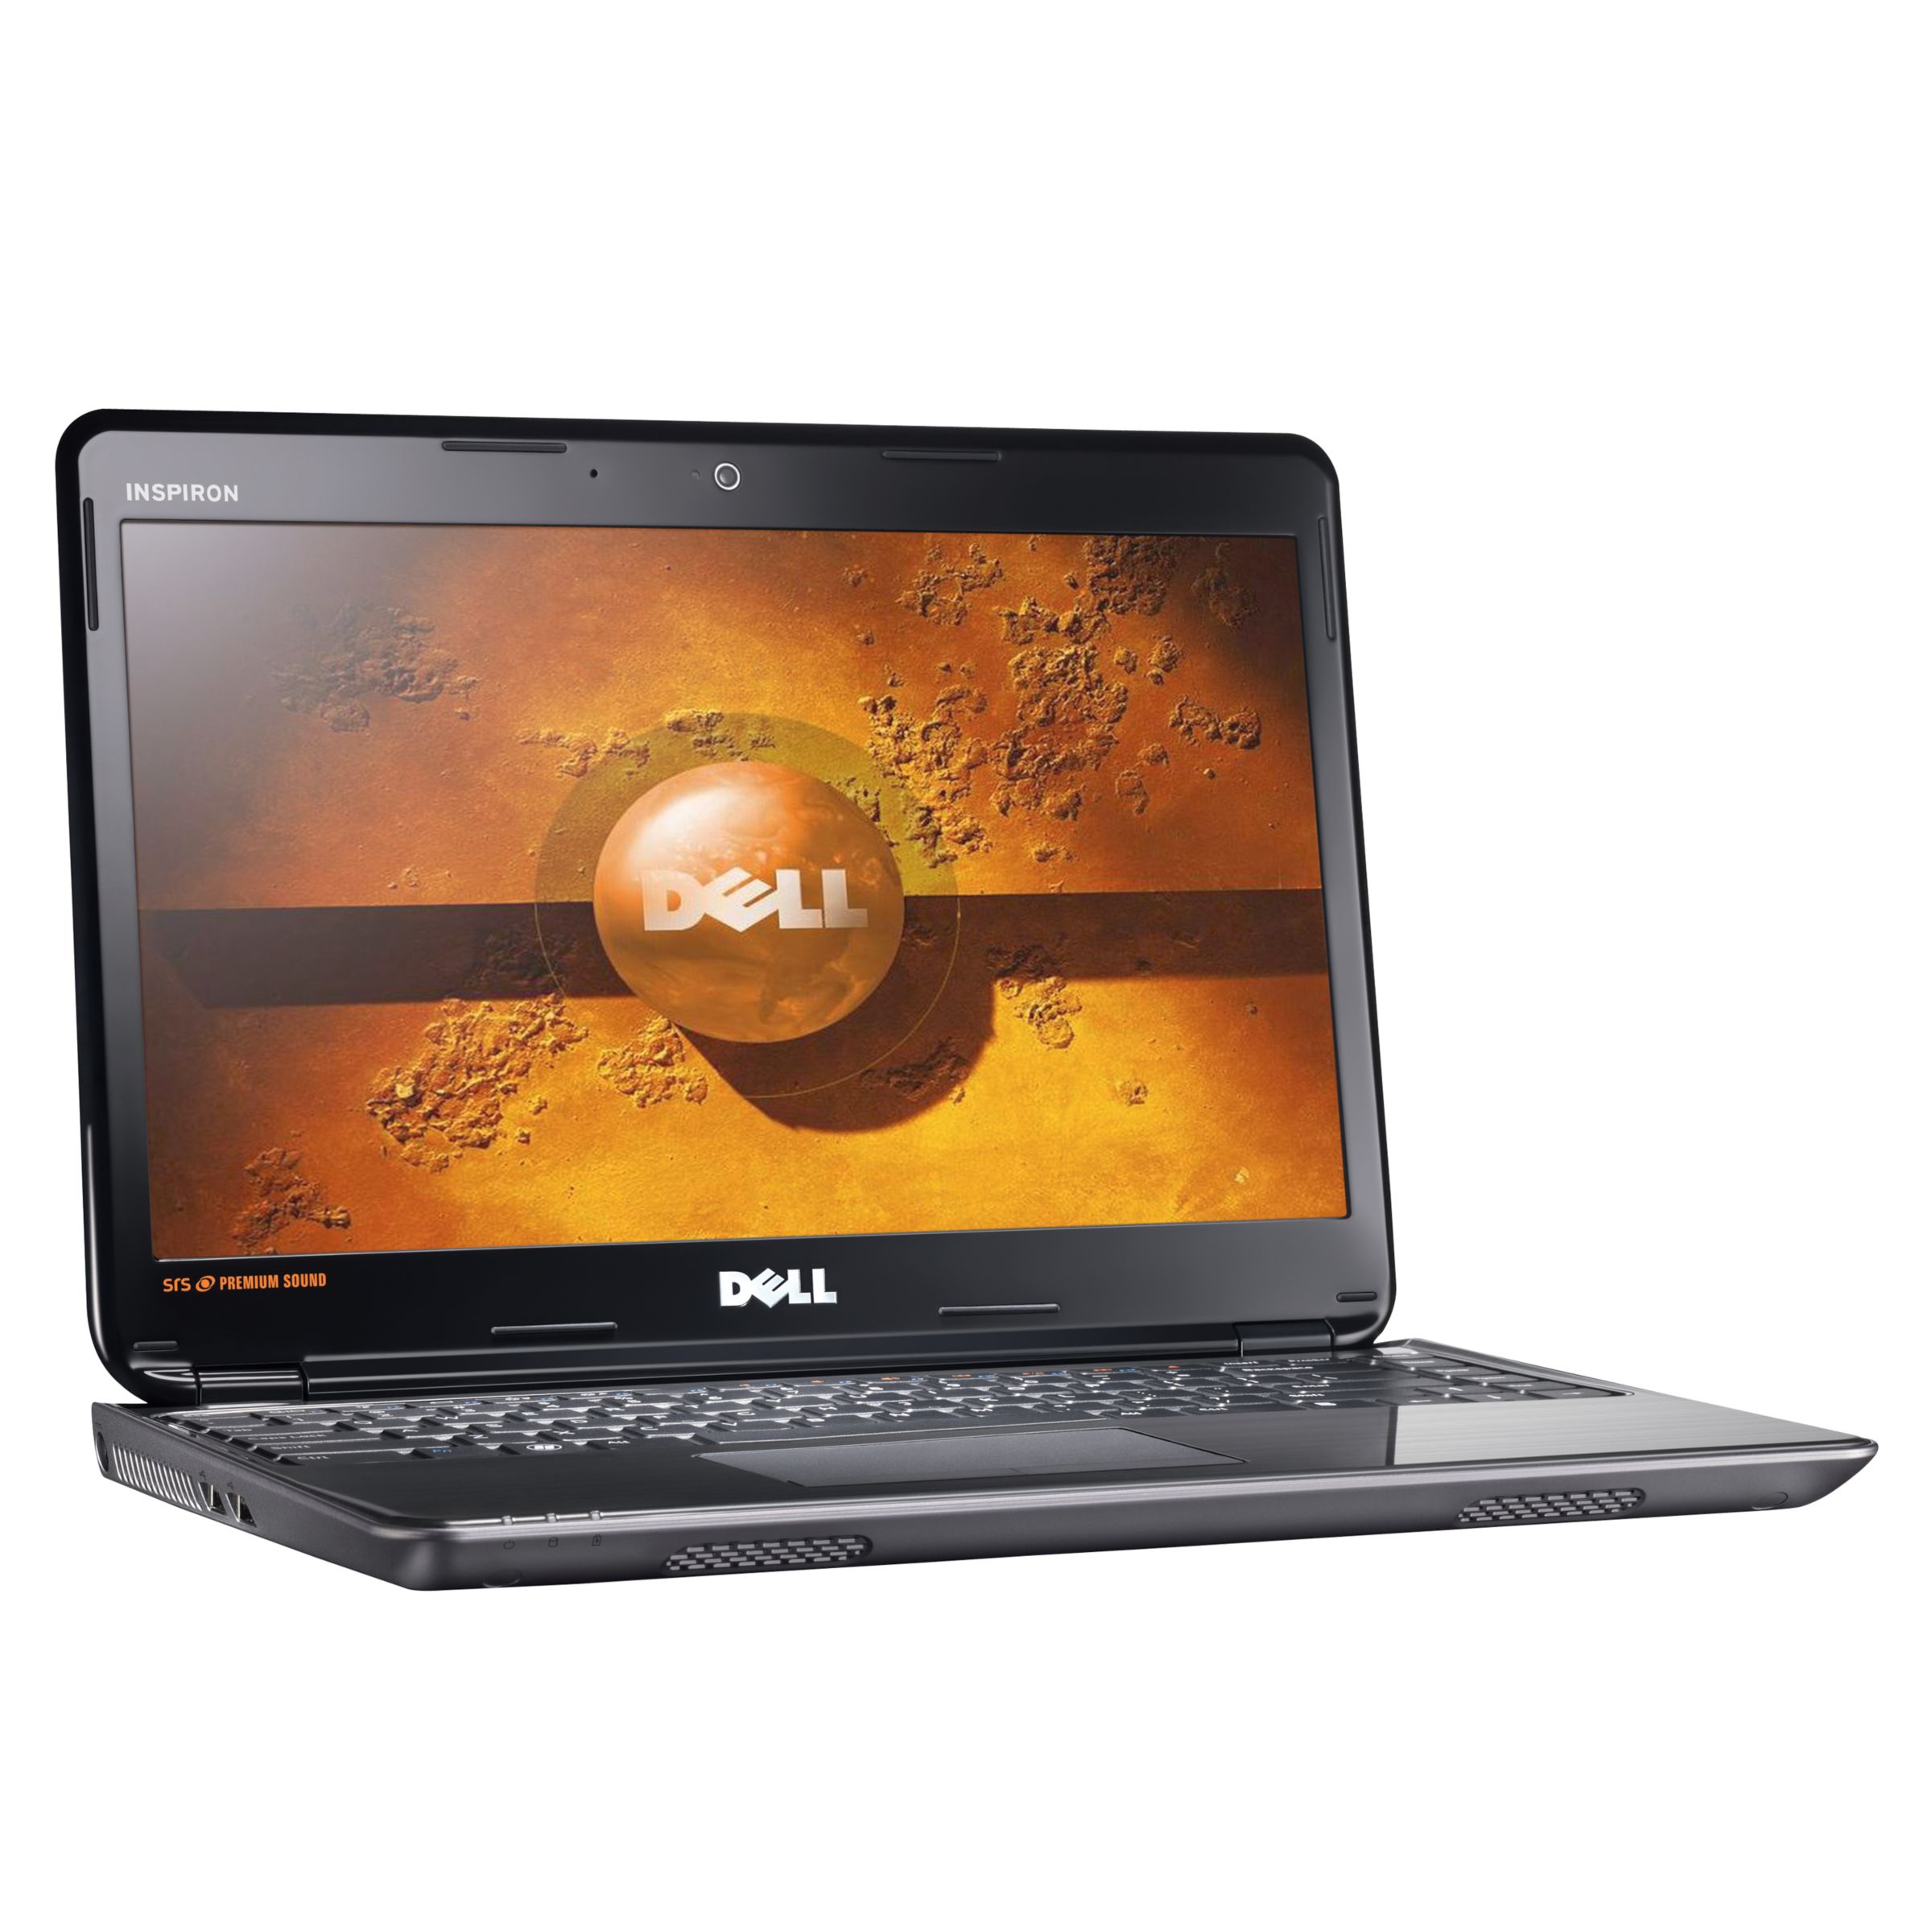 Dell Inspiron M301Z Laptop, AMD Turion, 500GB, 1.5GHz, 4GB RAM with 13.3 Inch Display at John Lewis